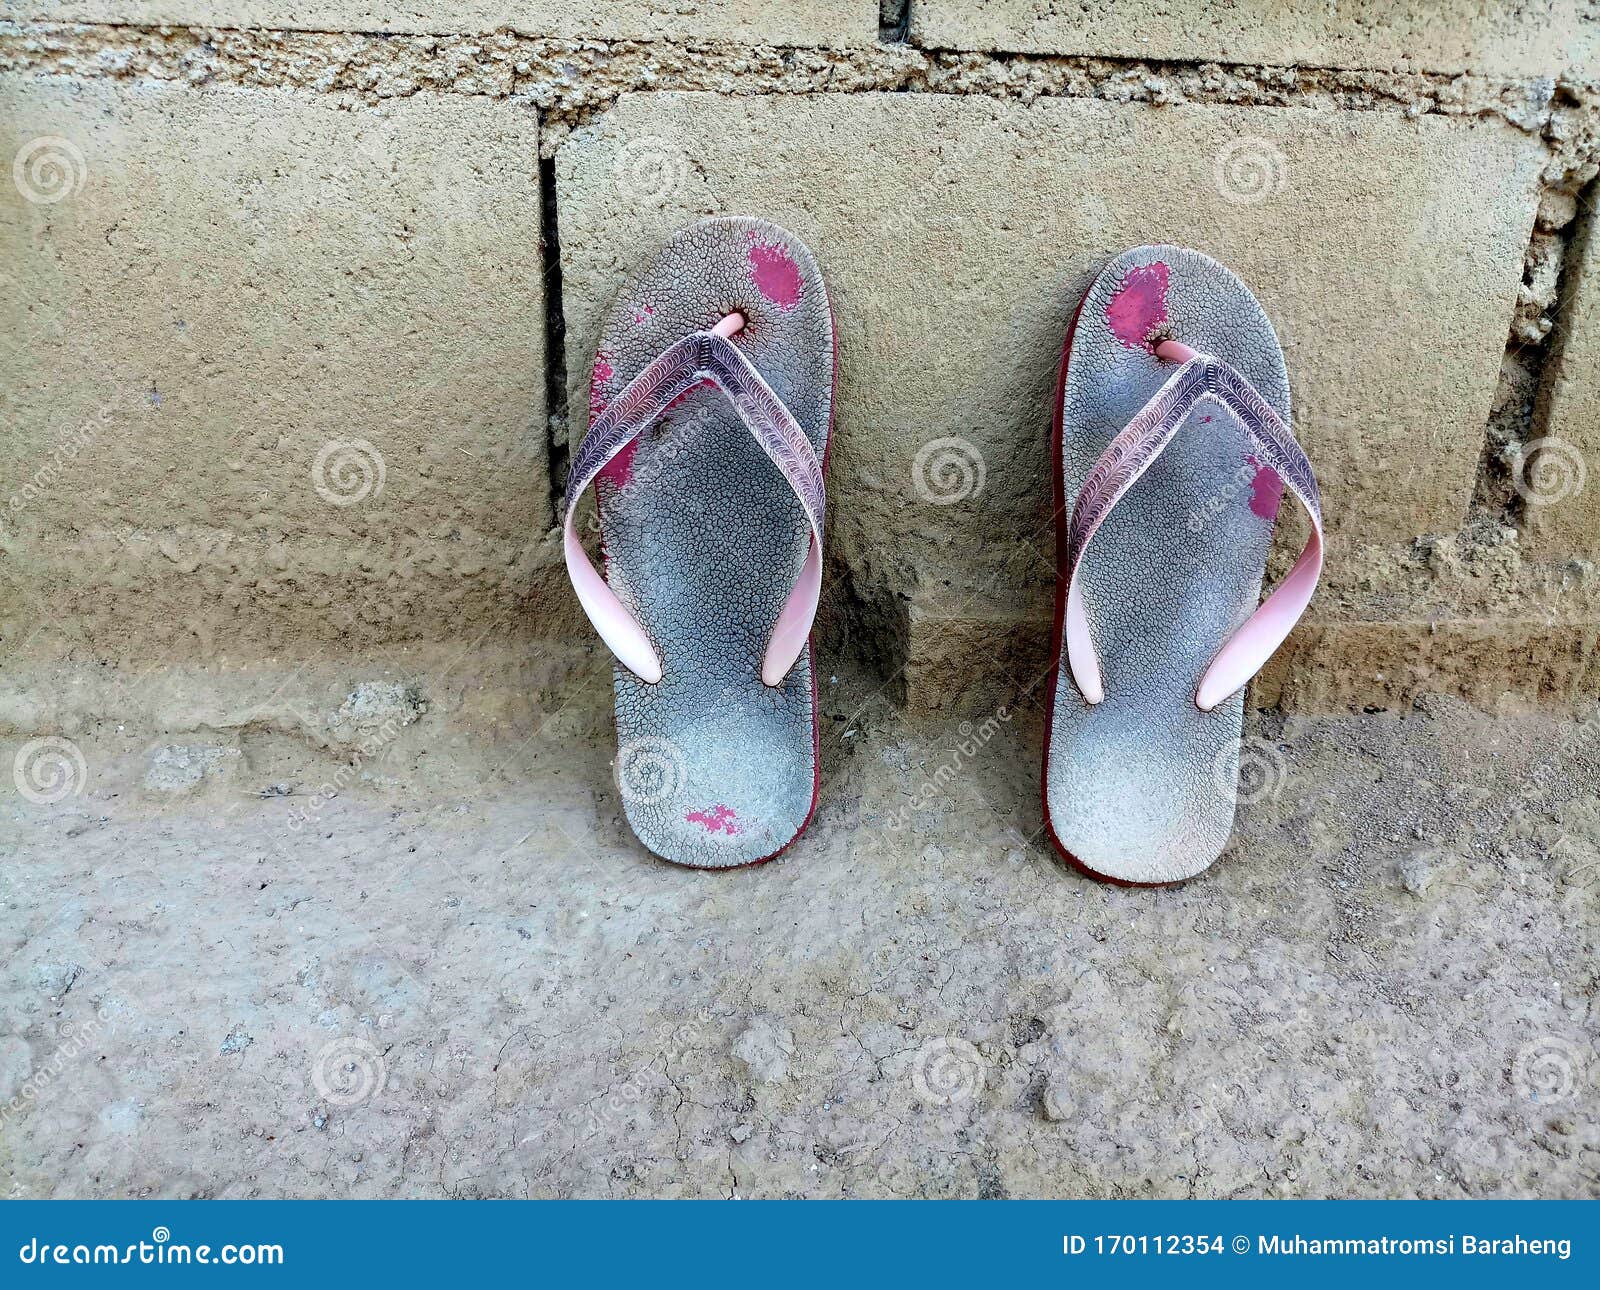 254 Dirty Old Slippers Photos - Free & Royalty-Free Stock Photos from ...